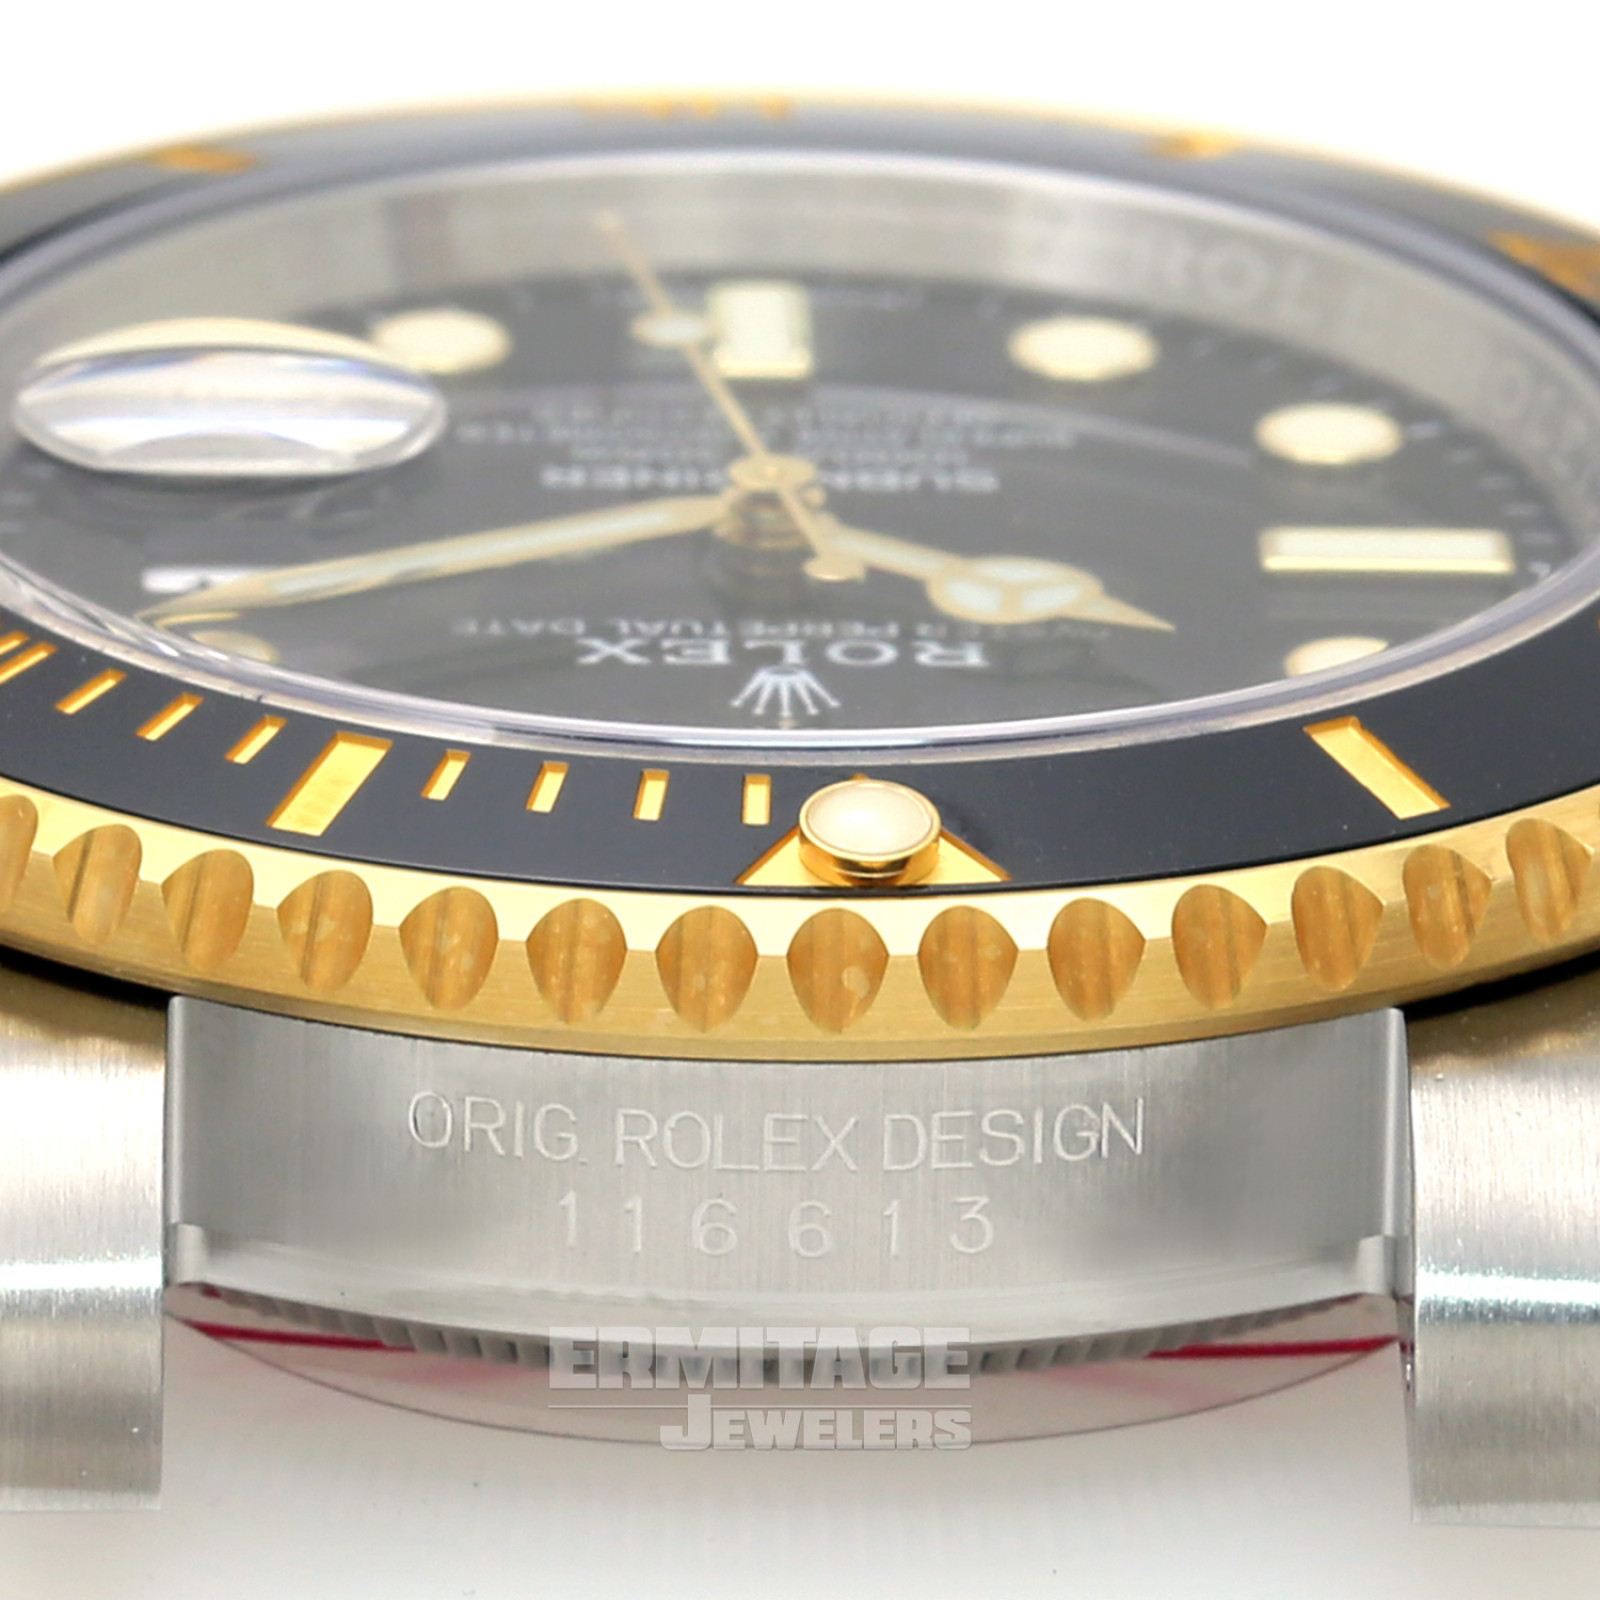 Pre-Owned Yellow Gold Rolex Submariner 116613 with Black Dial